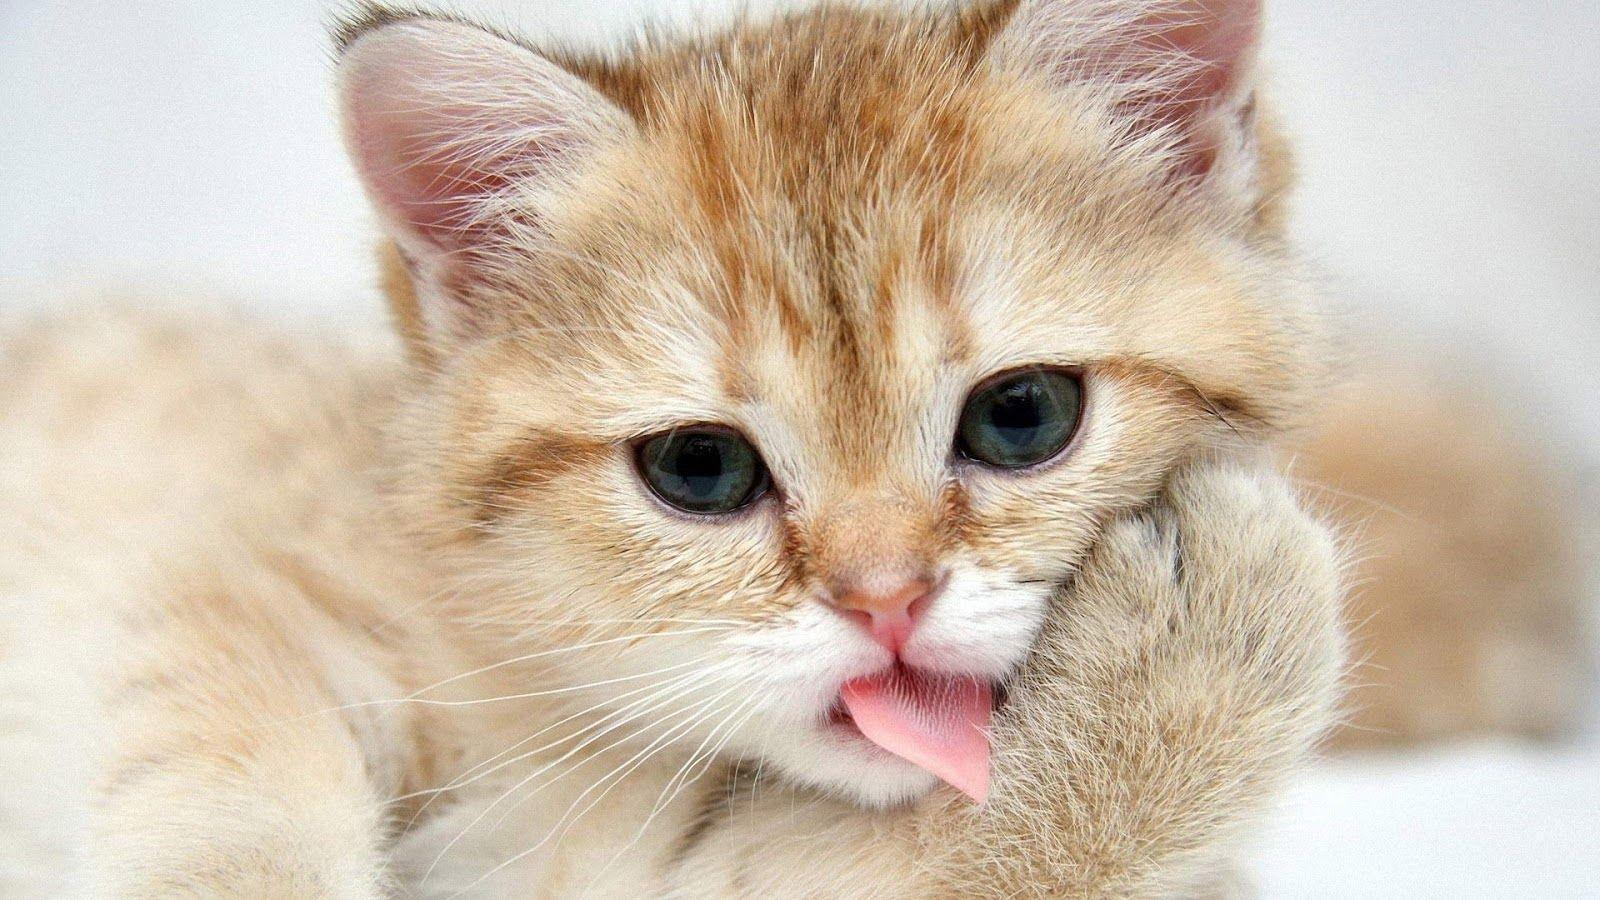 Cute Cat Wallpapers As Dp Wallpaper Cave Cute whatsapp status video heart touching cute cats video so many cute kittens videos compilation 2018. cute cat wallpapers as dp wallpaper cave